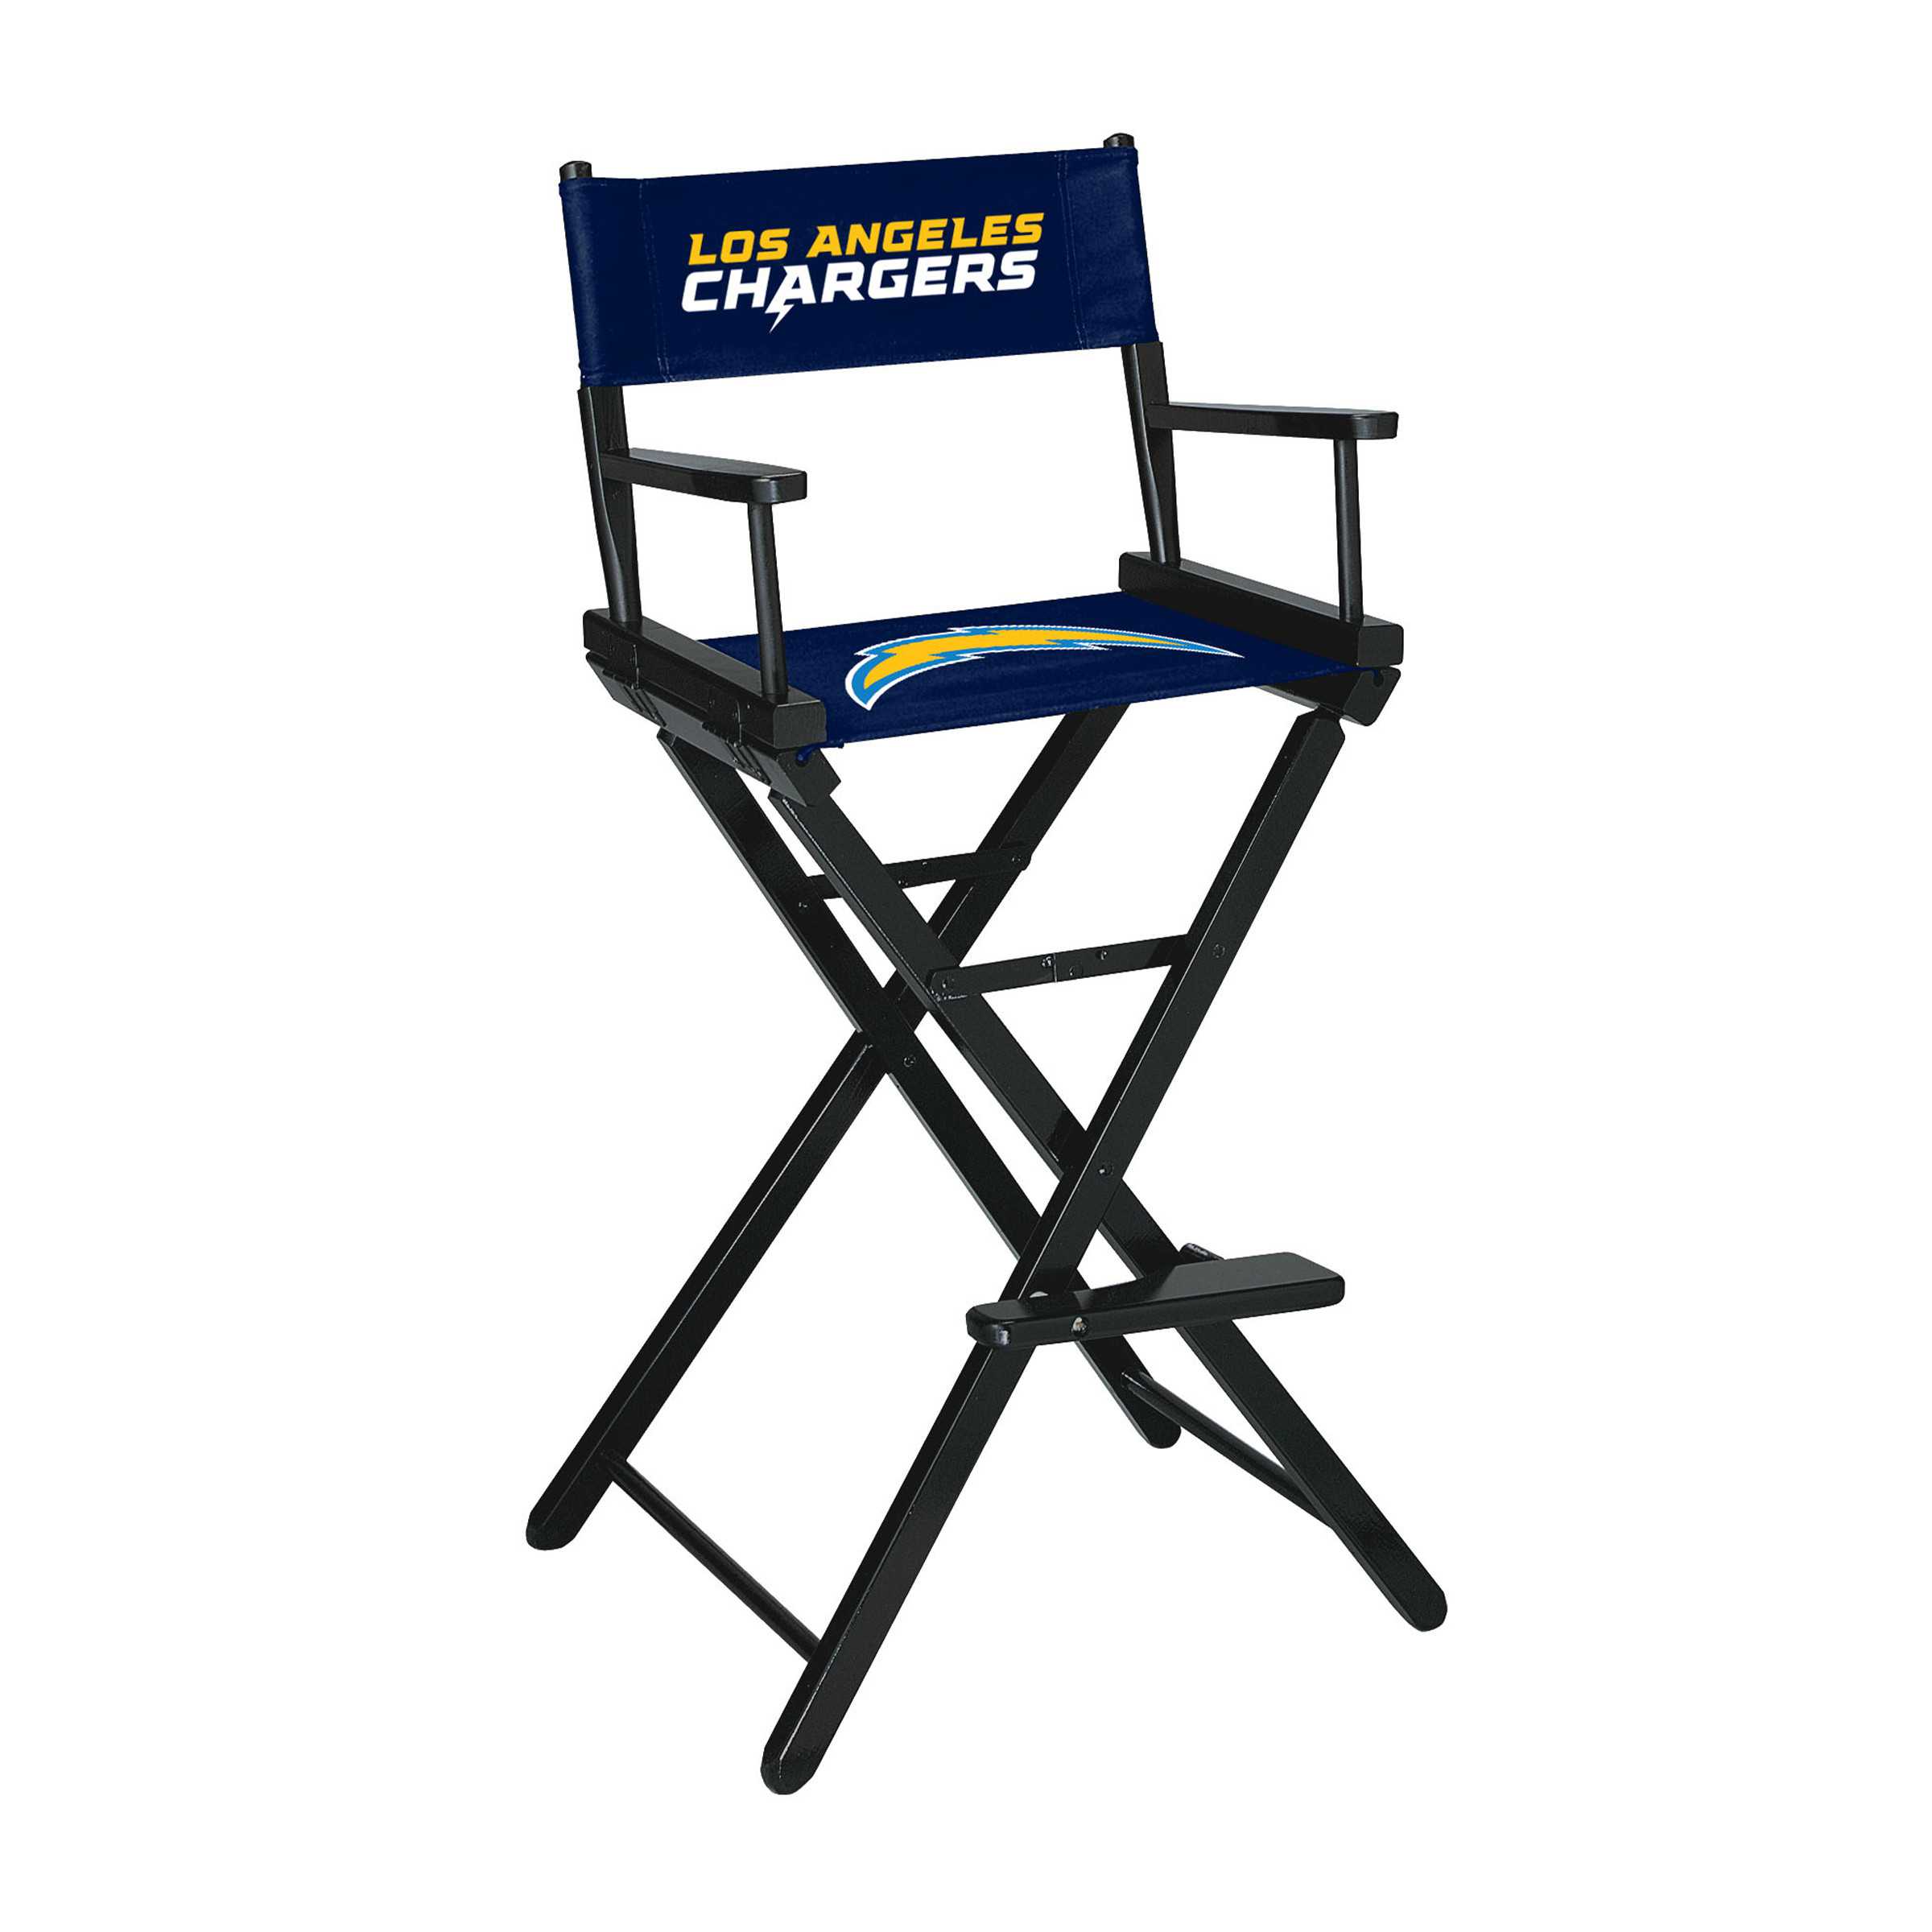 LOS ANGELES CHARGERS BAR HEIGHT DIRECTORS CHAIR